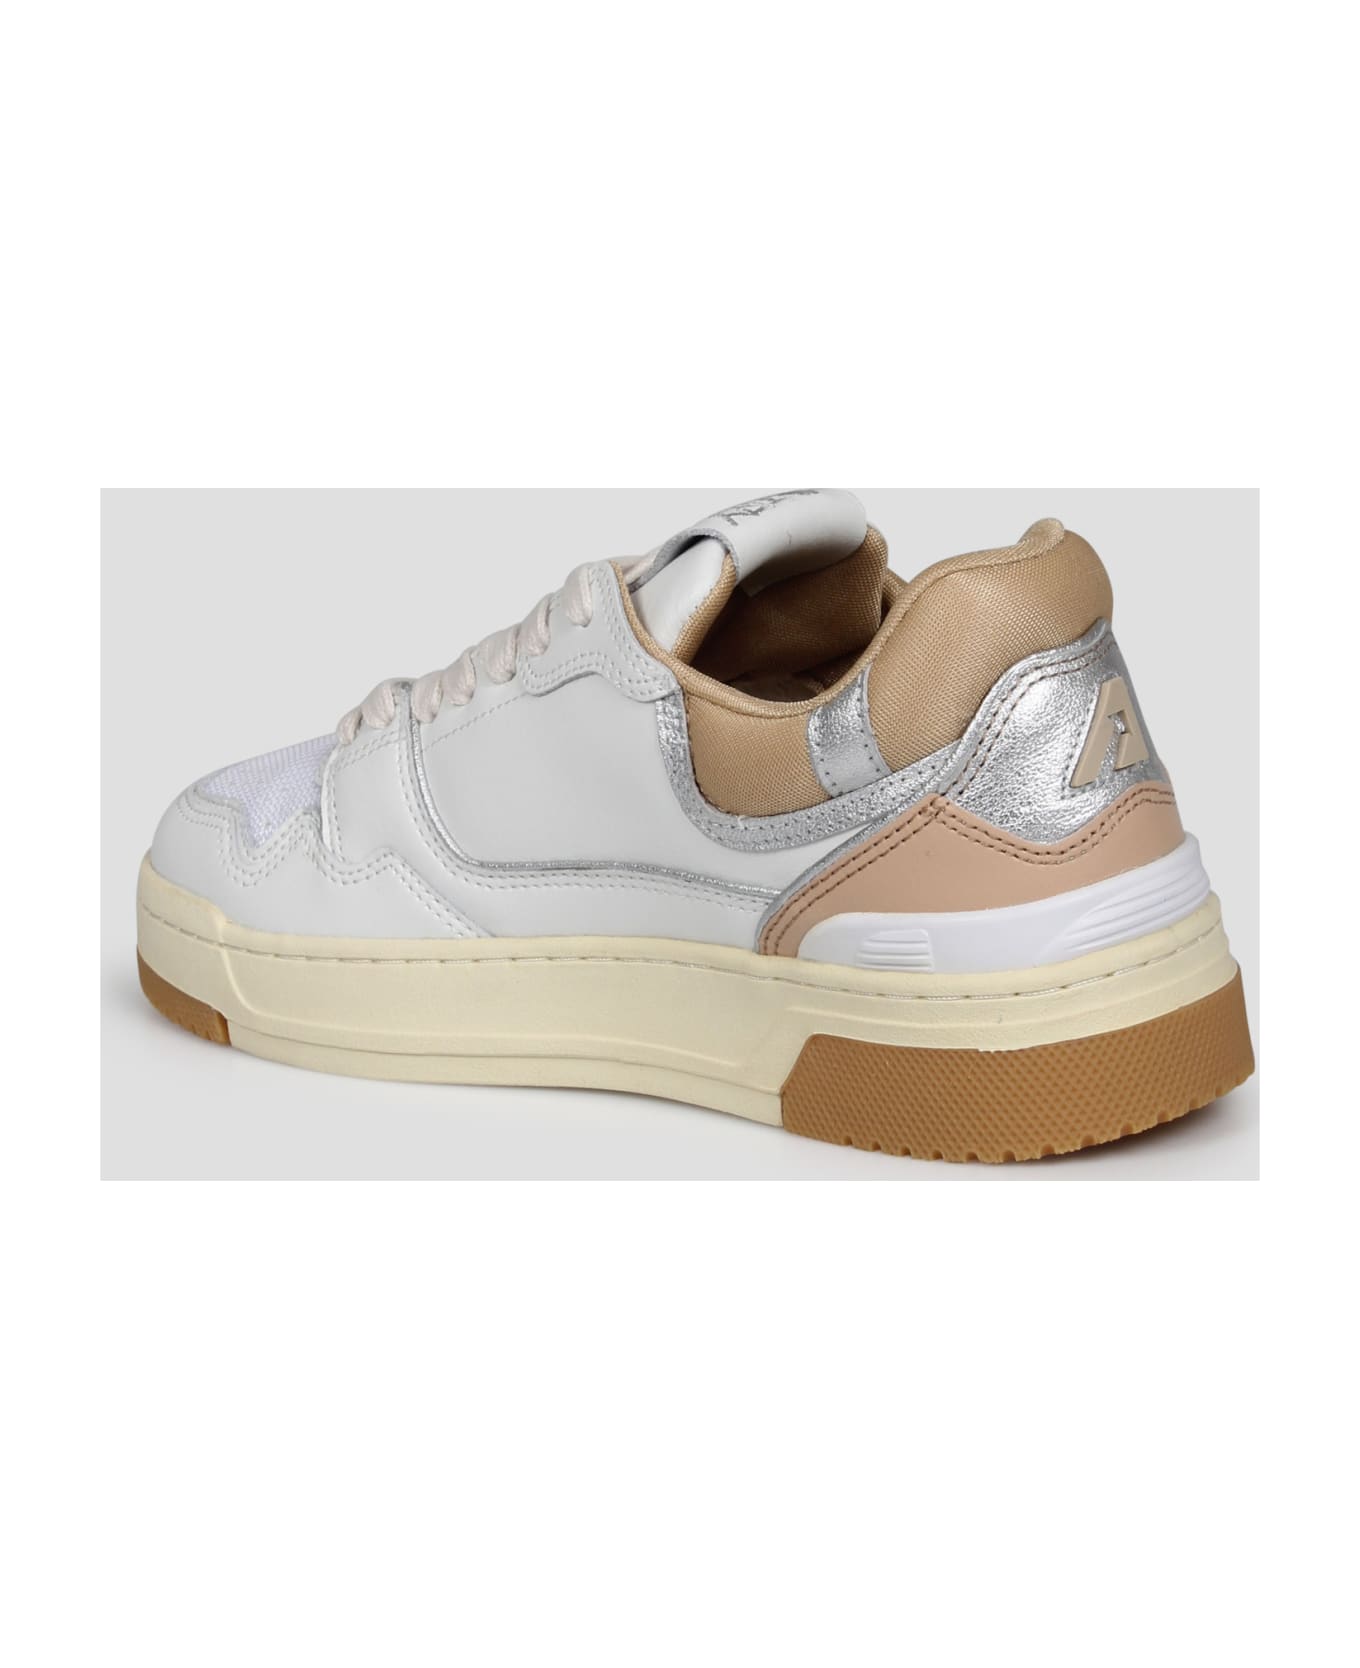 Autry Clc Sneakers - White